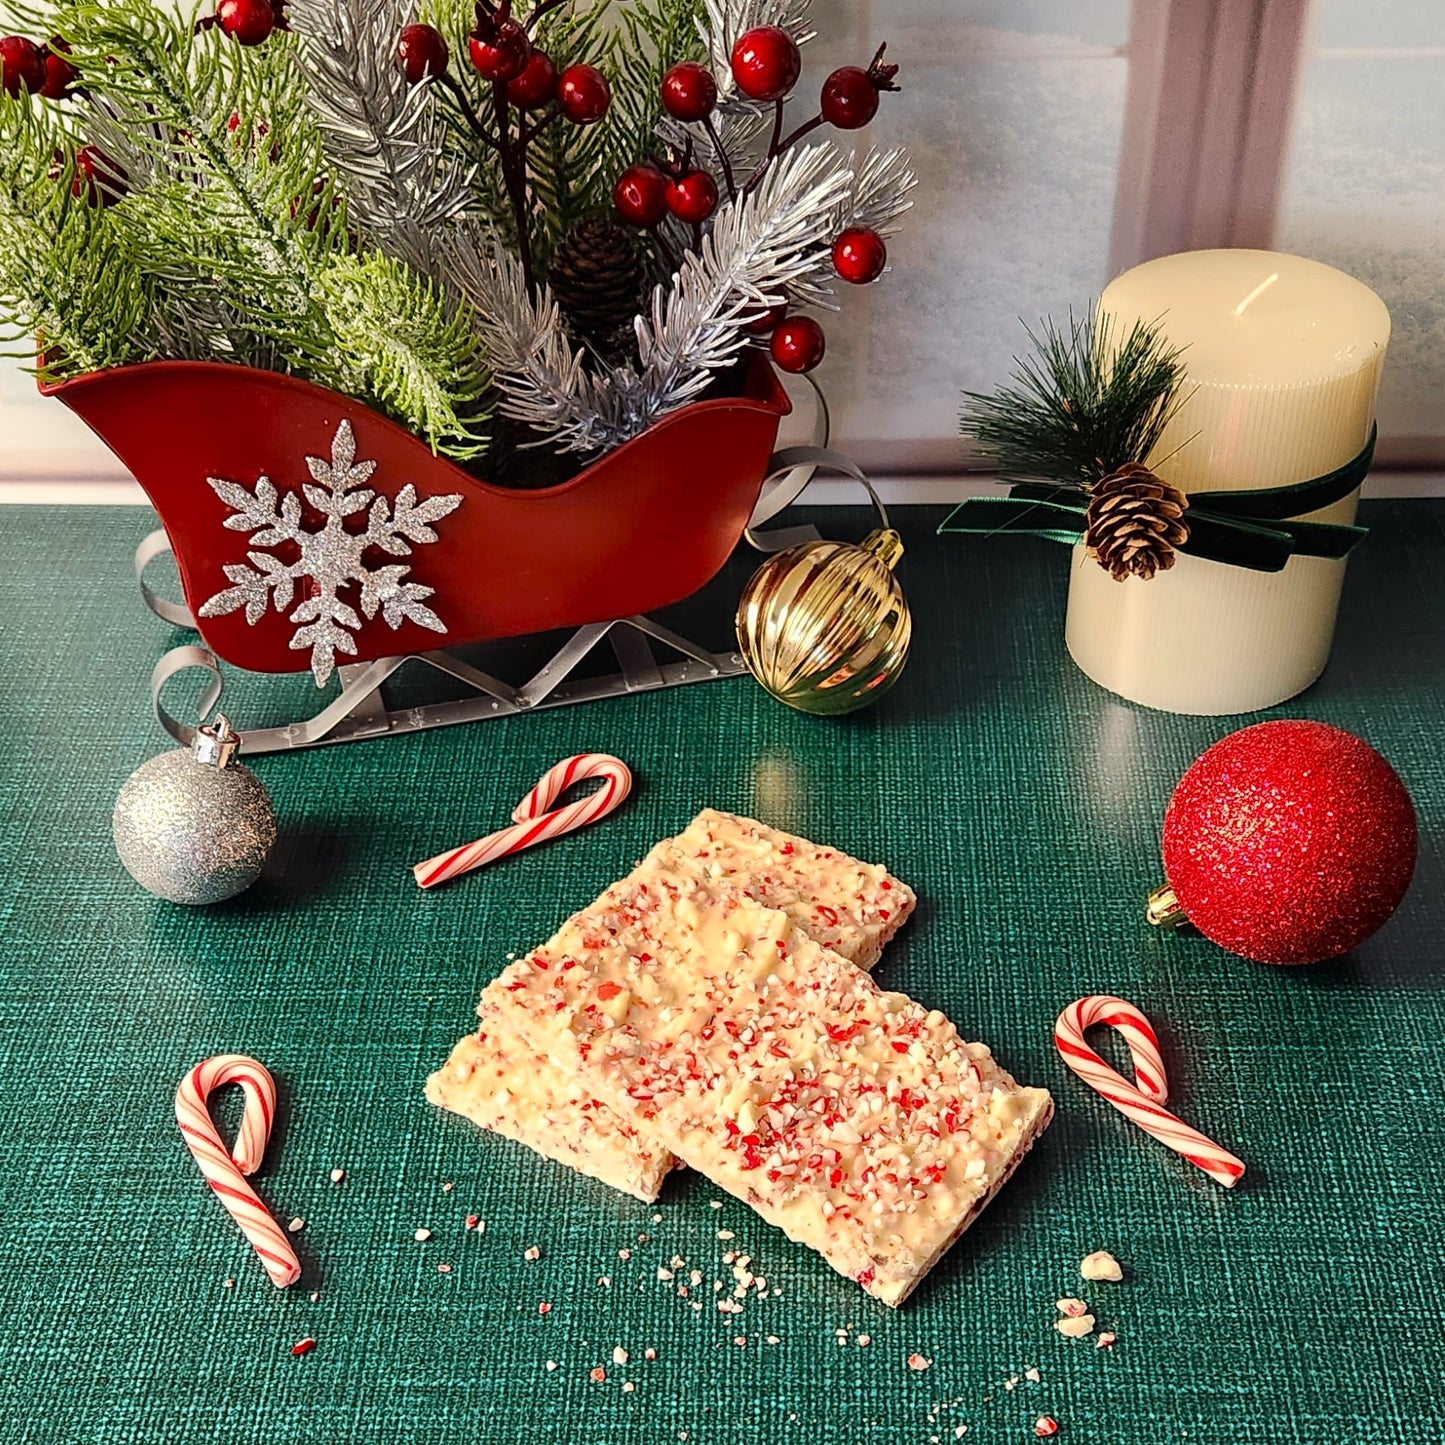 Creamy White Chocolate mixed with refreshing peppermint candy cane pieces.